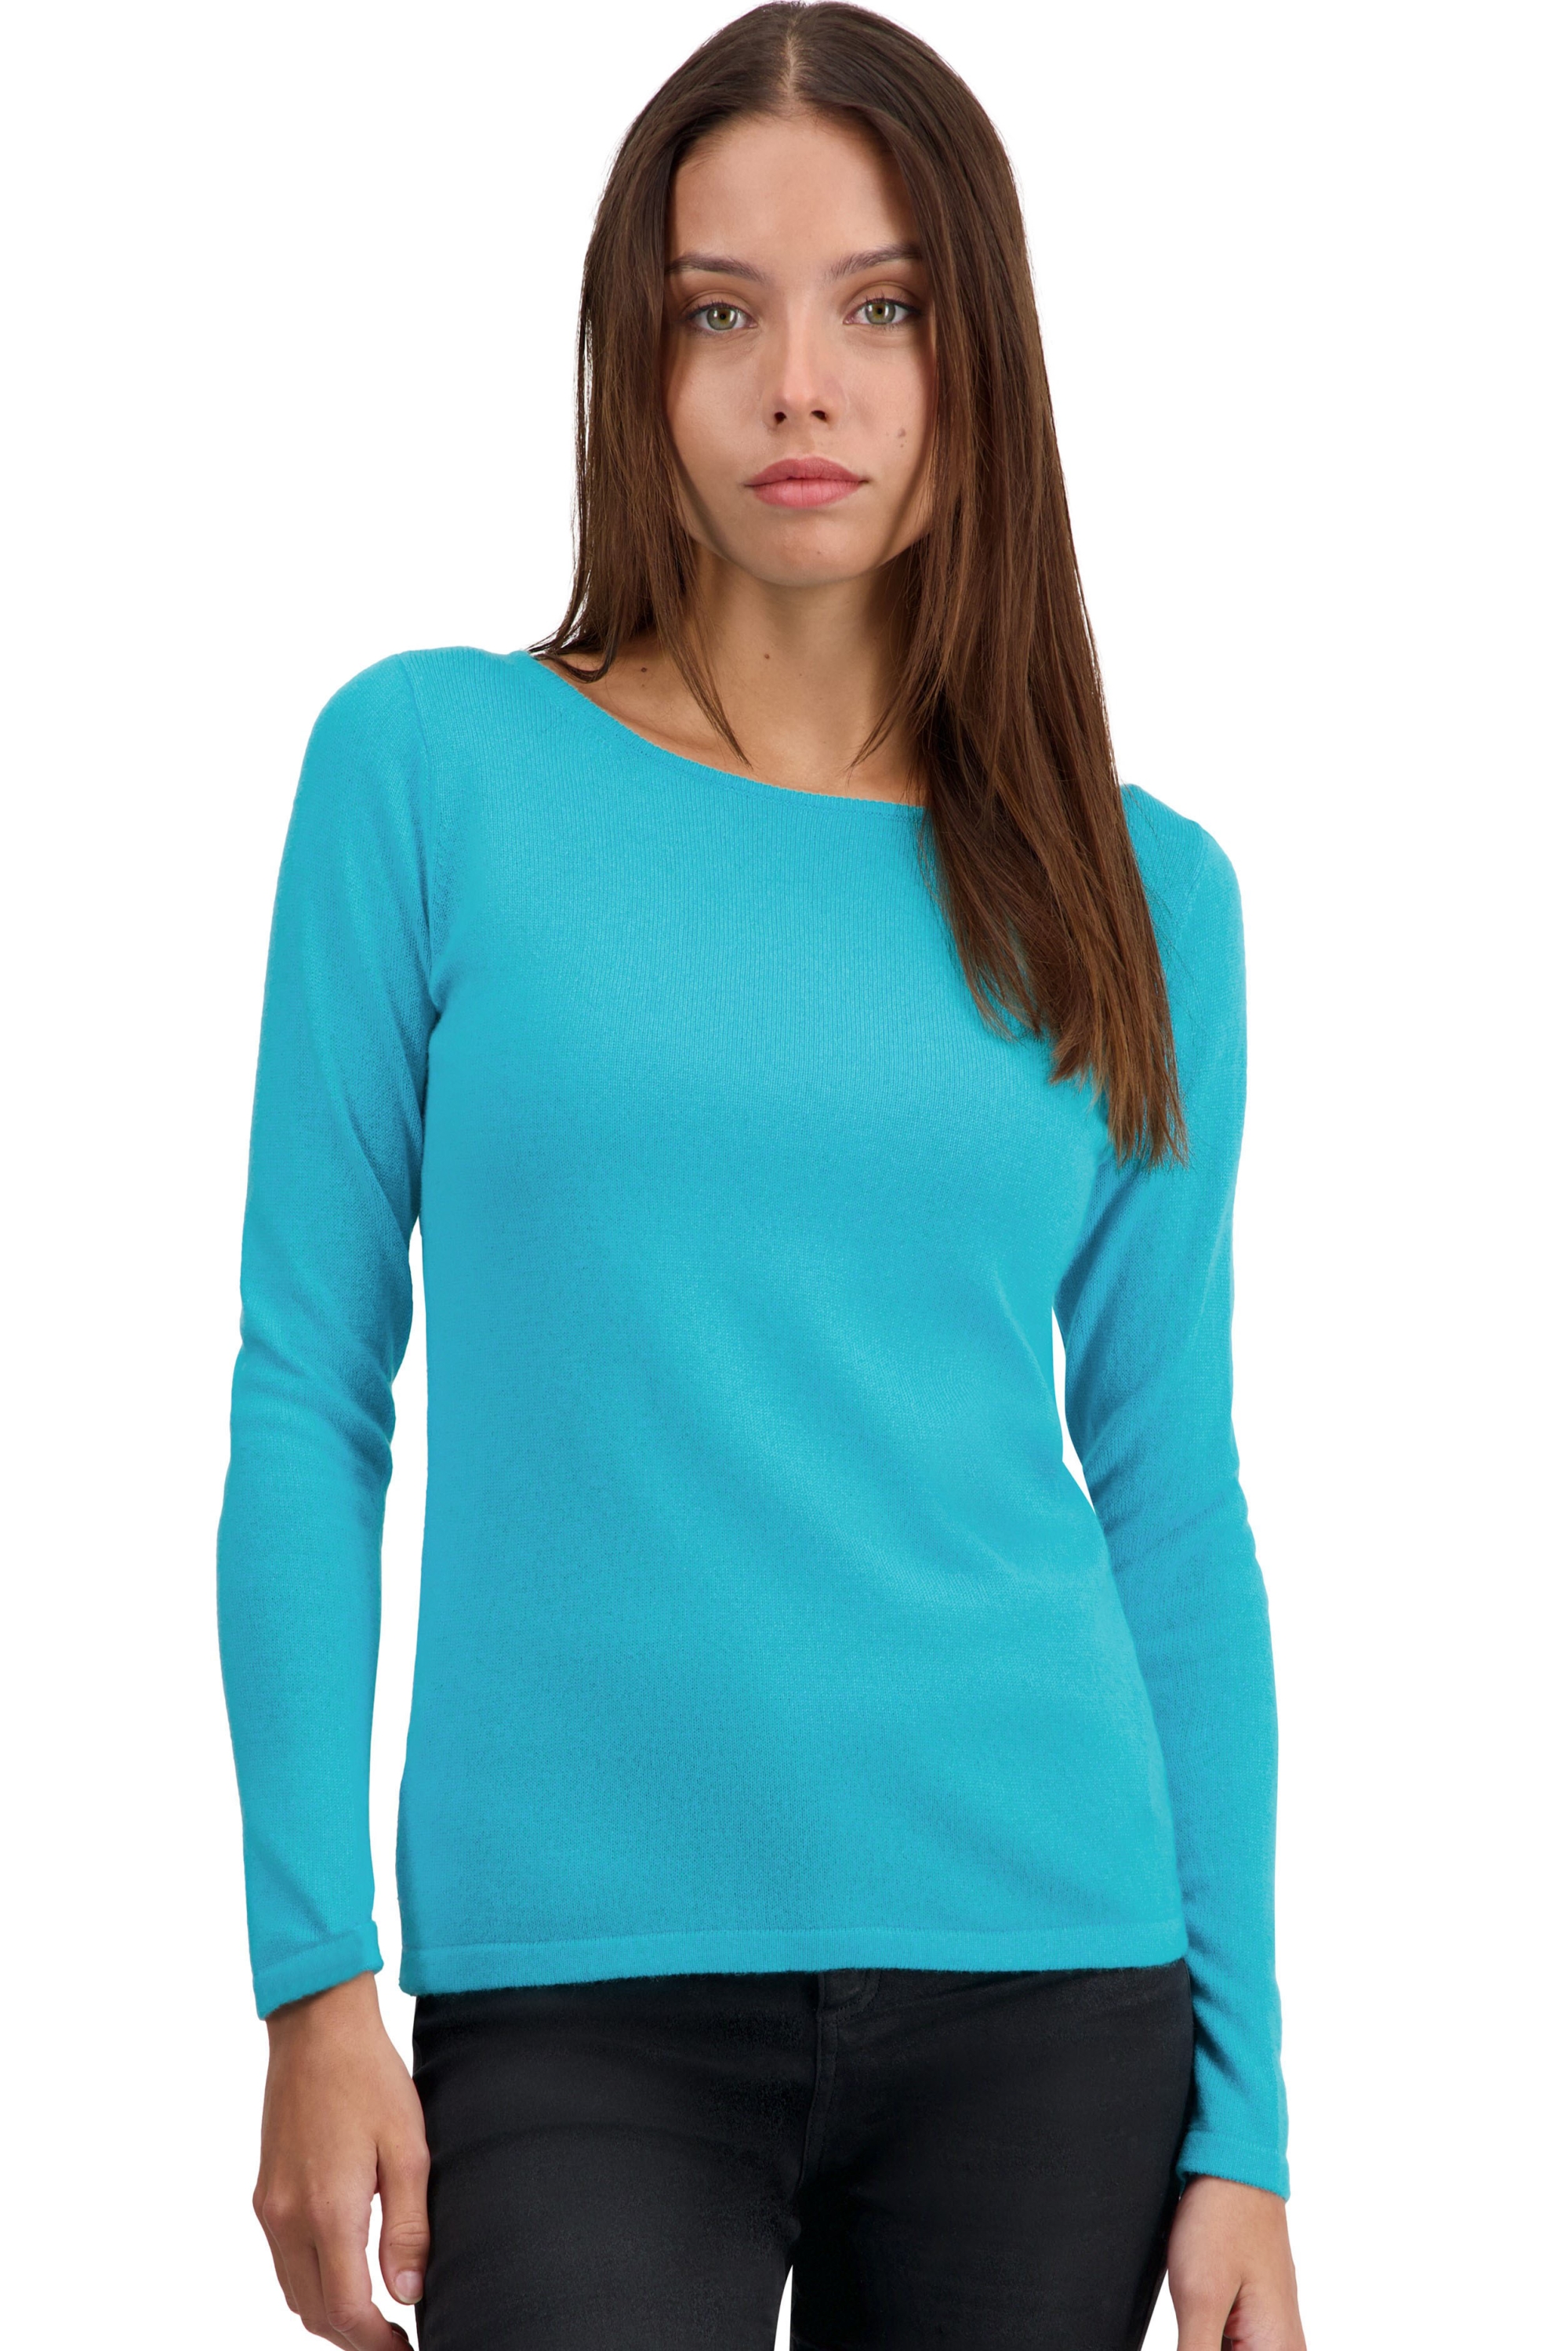 Cashmere ladies tennessy first kingfisher m